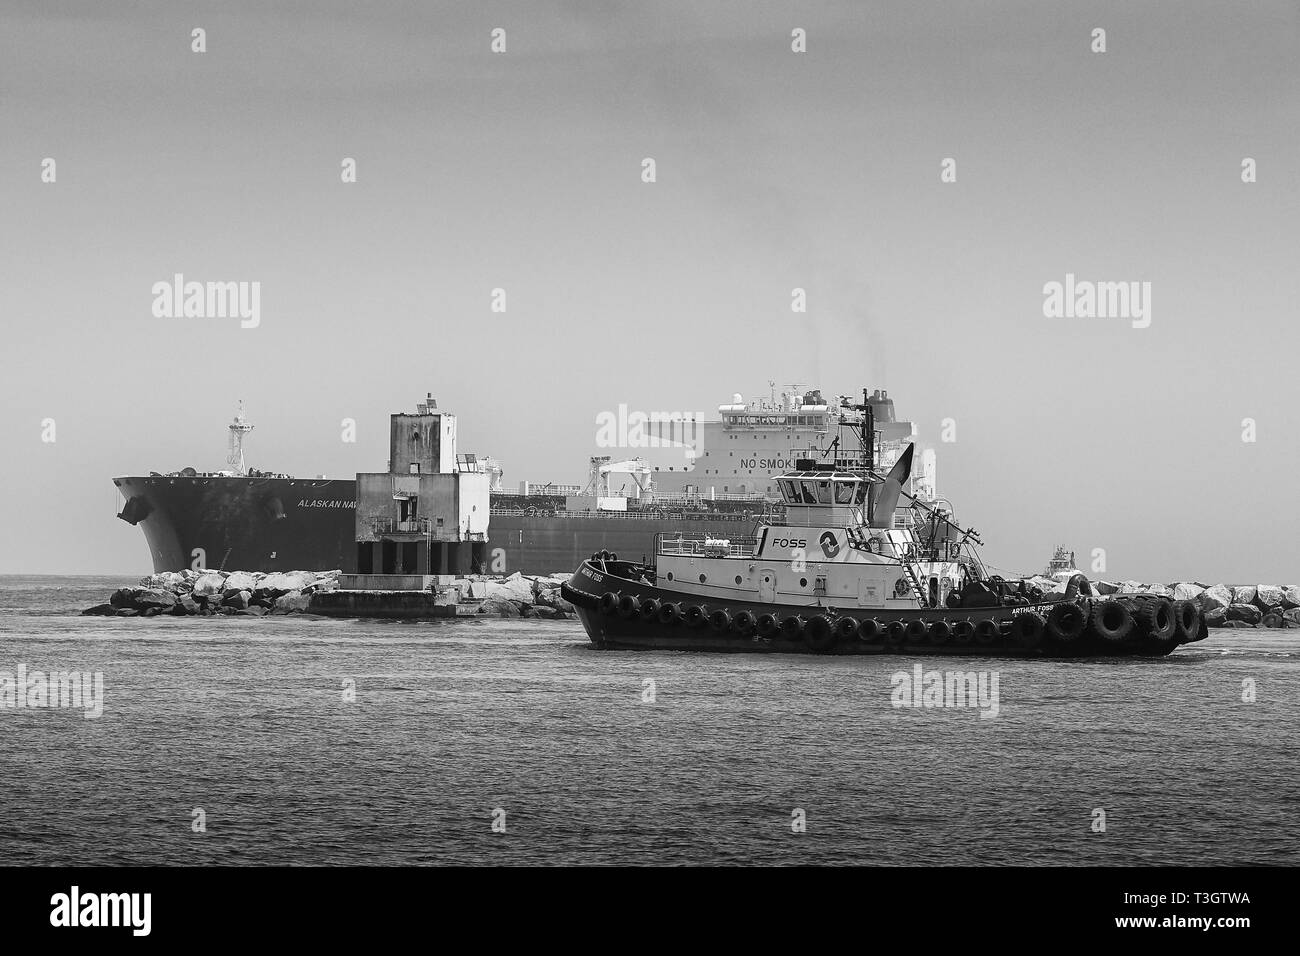 Black And White Photo Of A Tugboat Meeting The Supertanker, ALASKAN NAVIGATOR, At The Long Beach Light, As It Enters The Port Long Beach, California Stock Photo